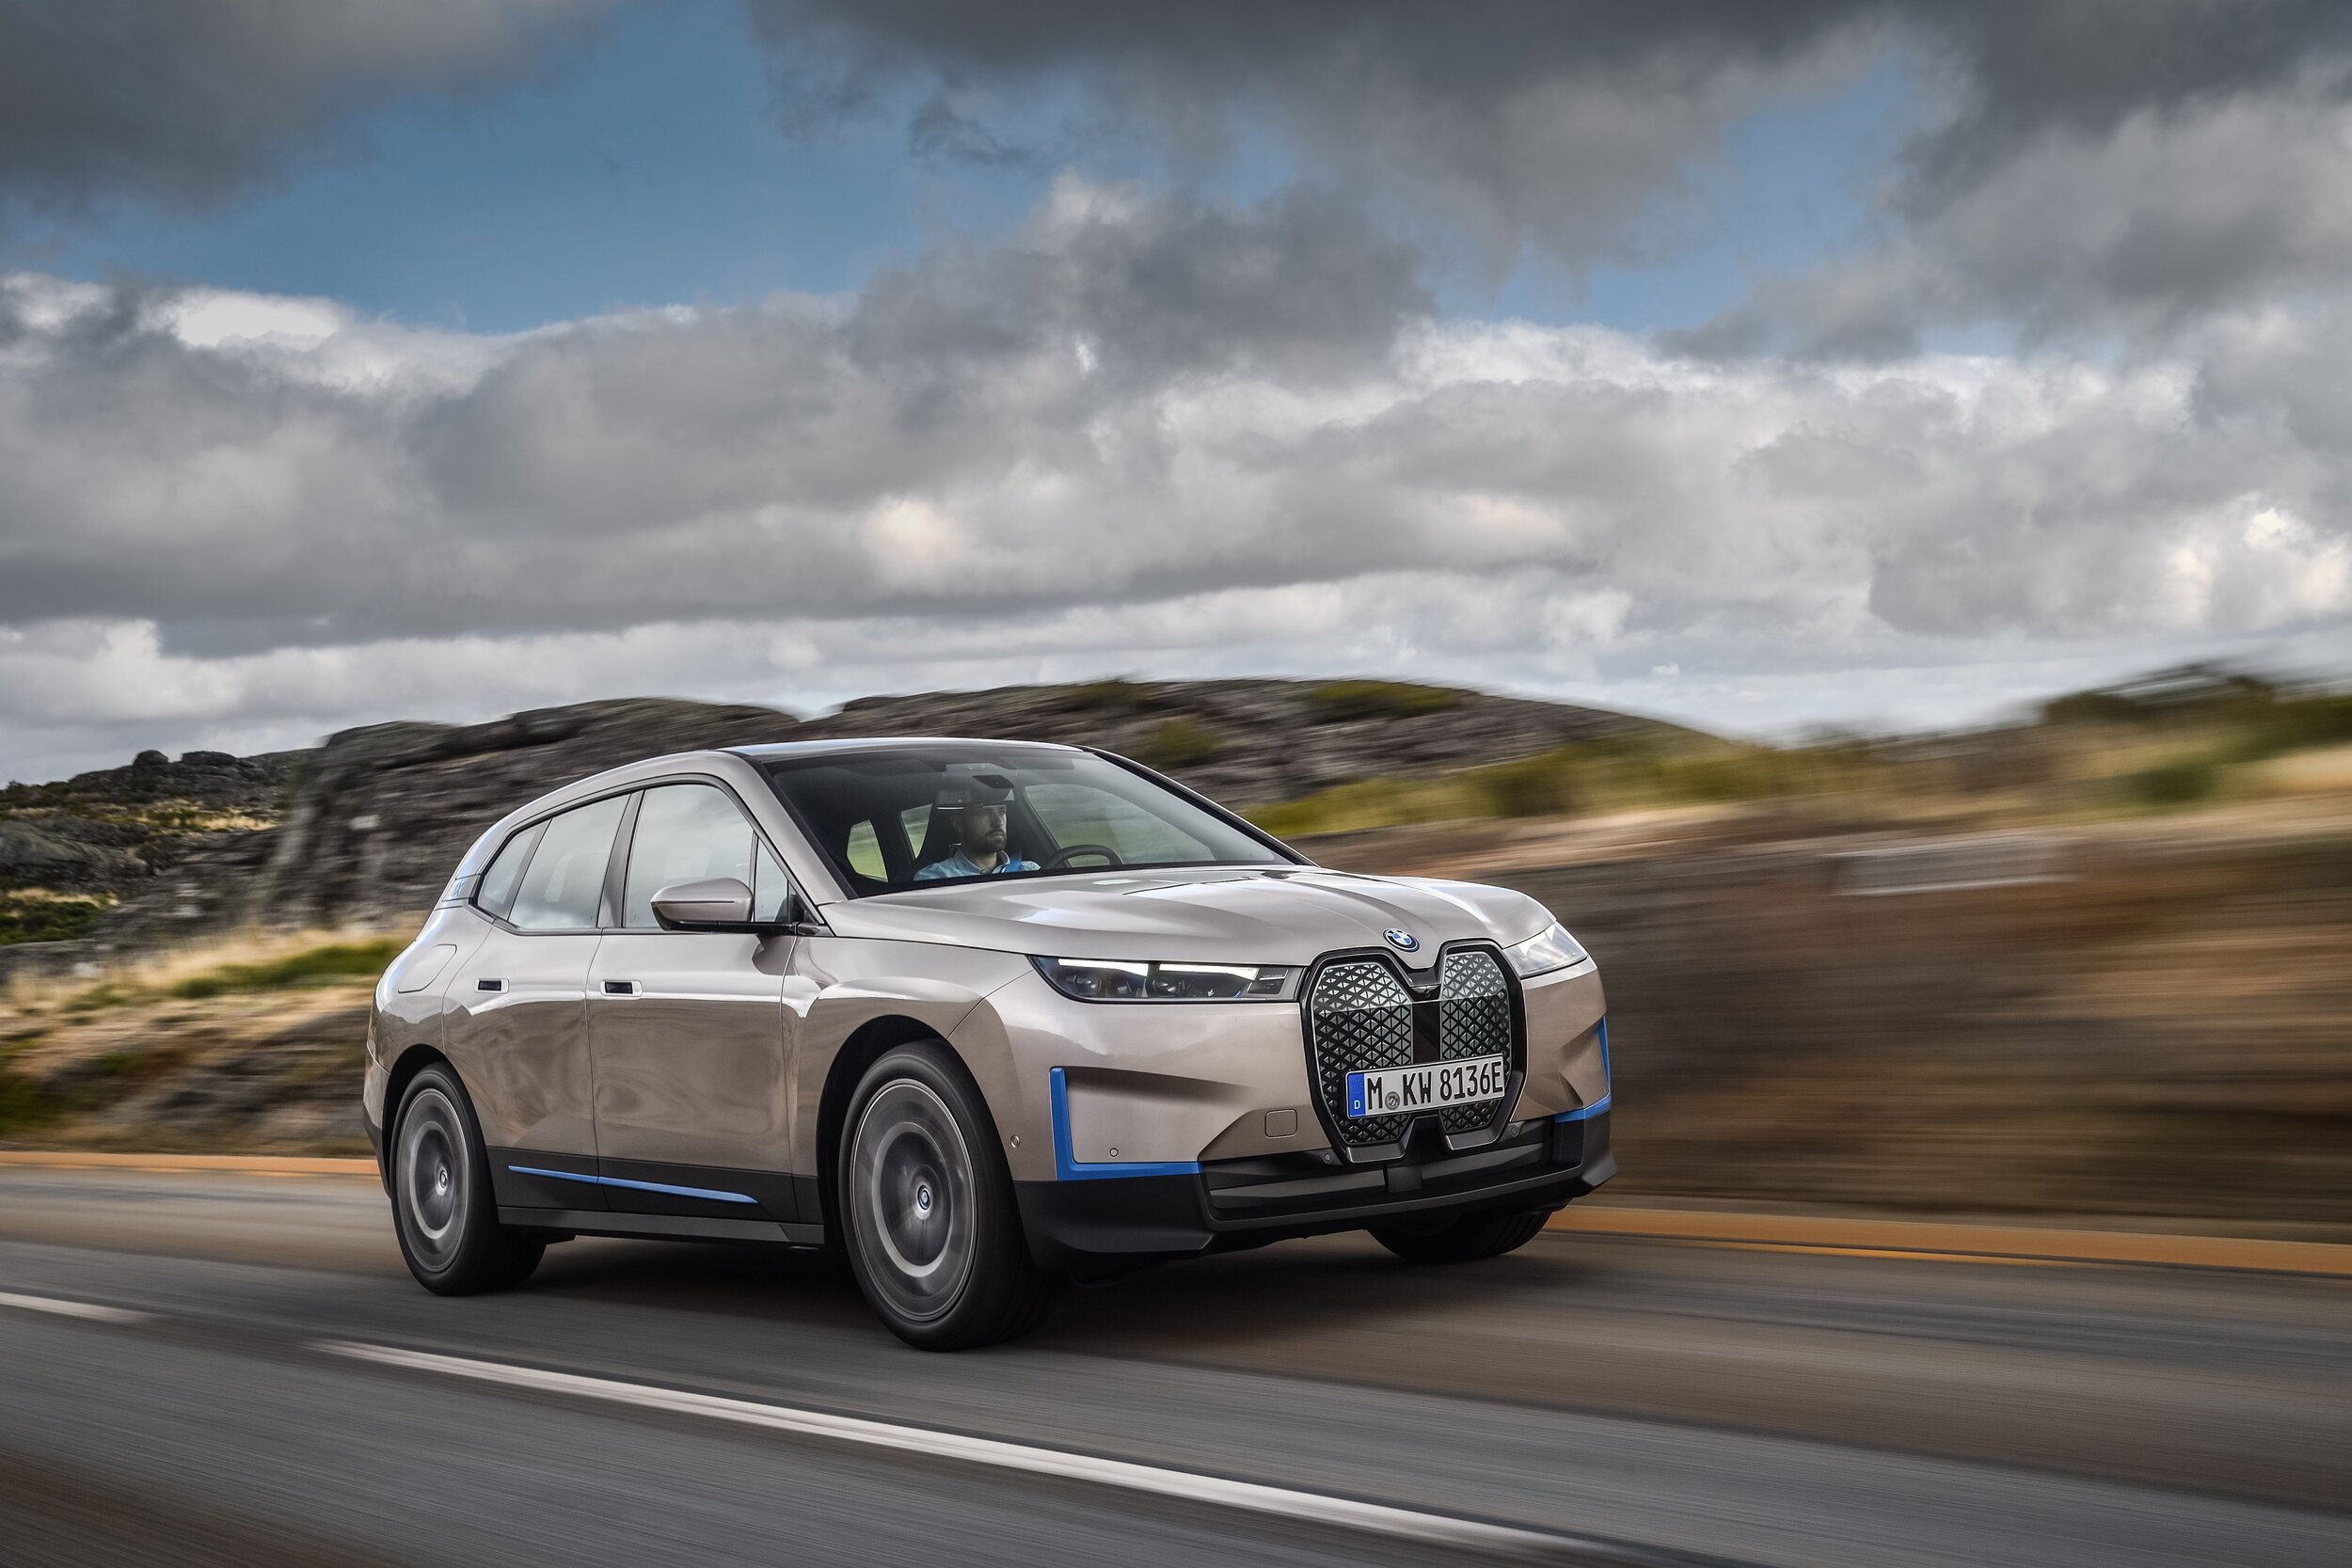 Tested: Why BMW's Flagship IX Electric Car Needs To Be Driven